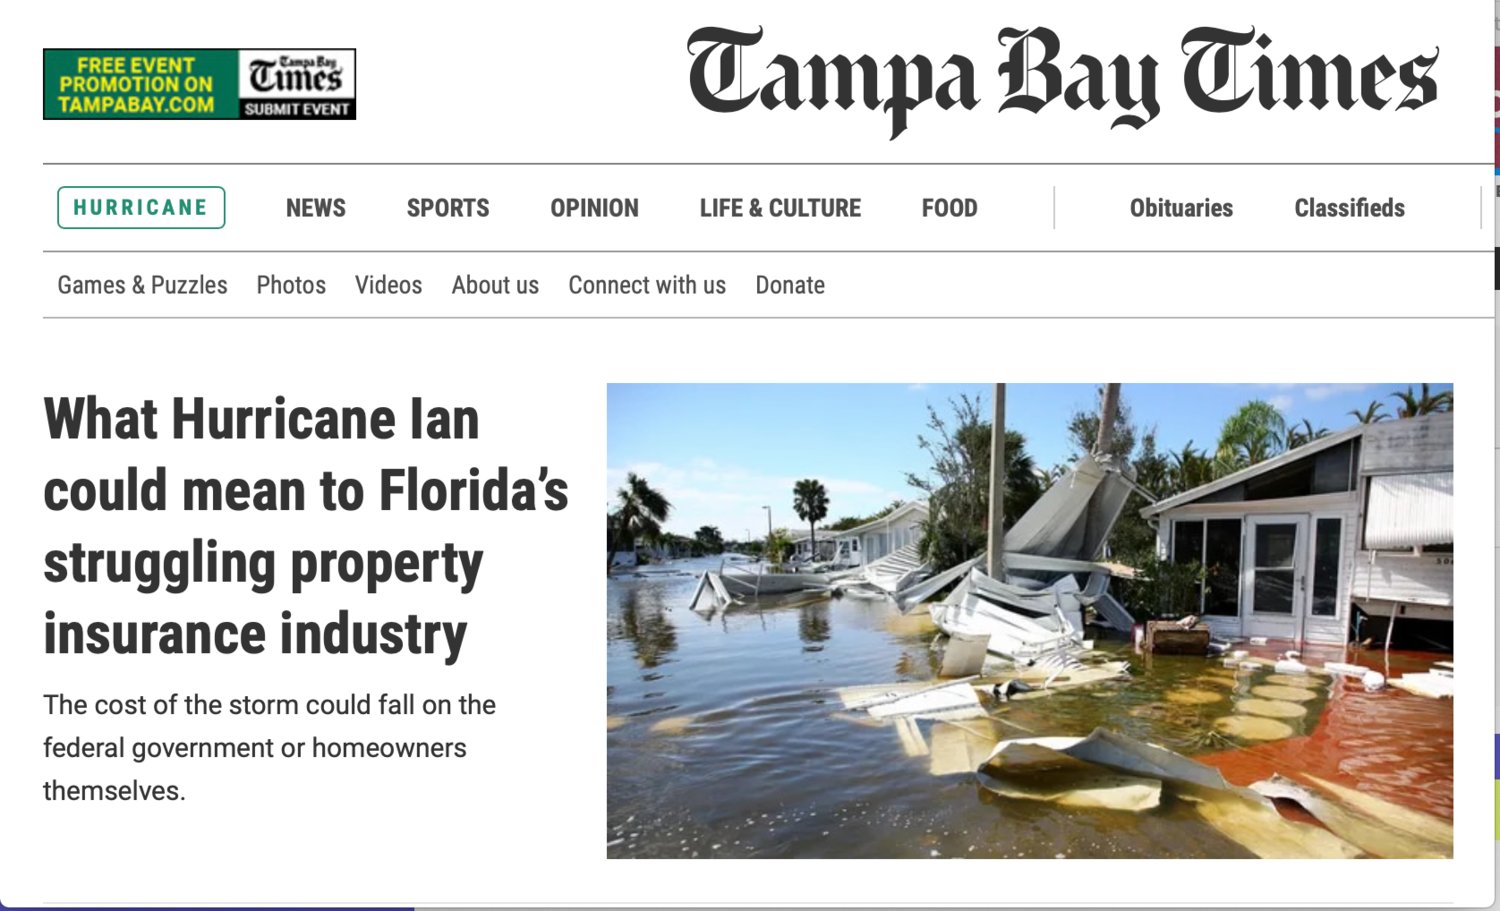 This October 1st story on the Tampa Bay Times website about Ian’s effect on Florida’s struggling insurance industry shows the Palmetto Palms RV Resort in Ft. Myers, FL, which was mostly destroyed by Hurricane Ian.